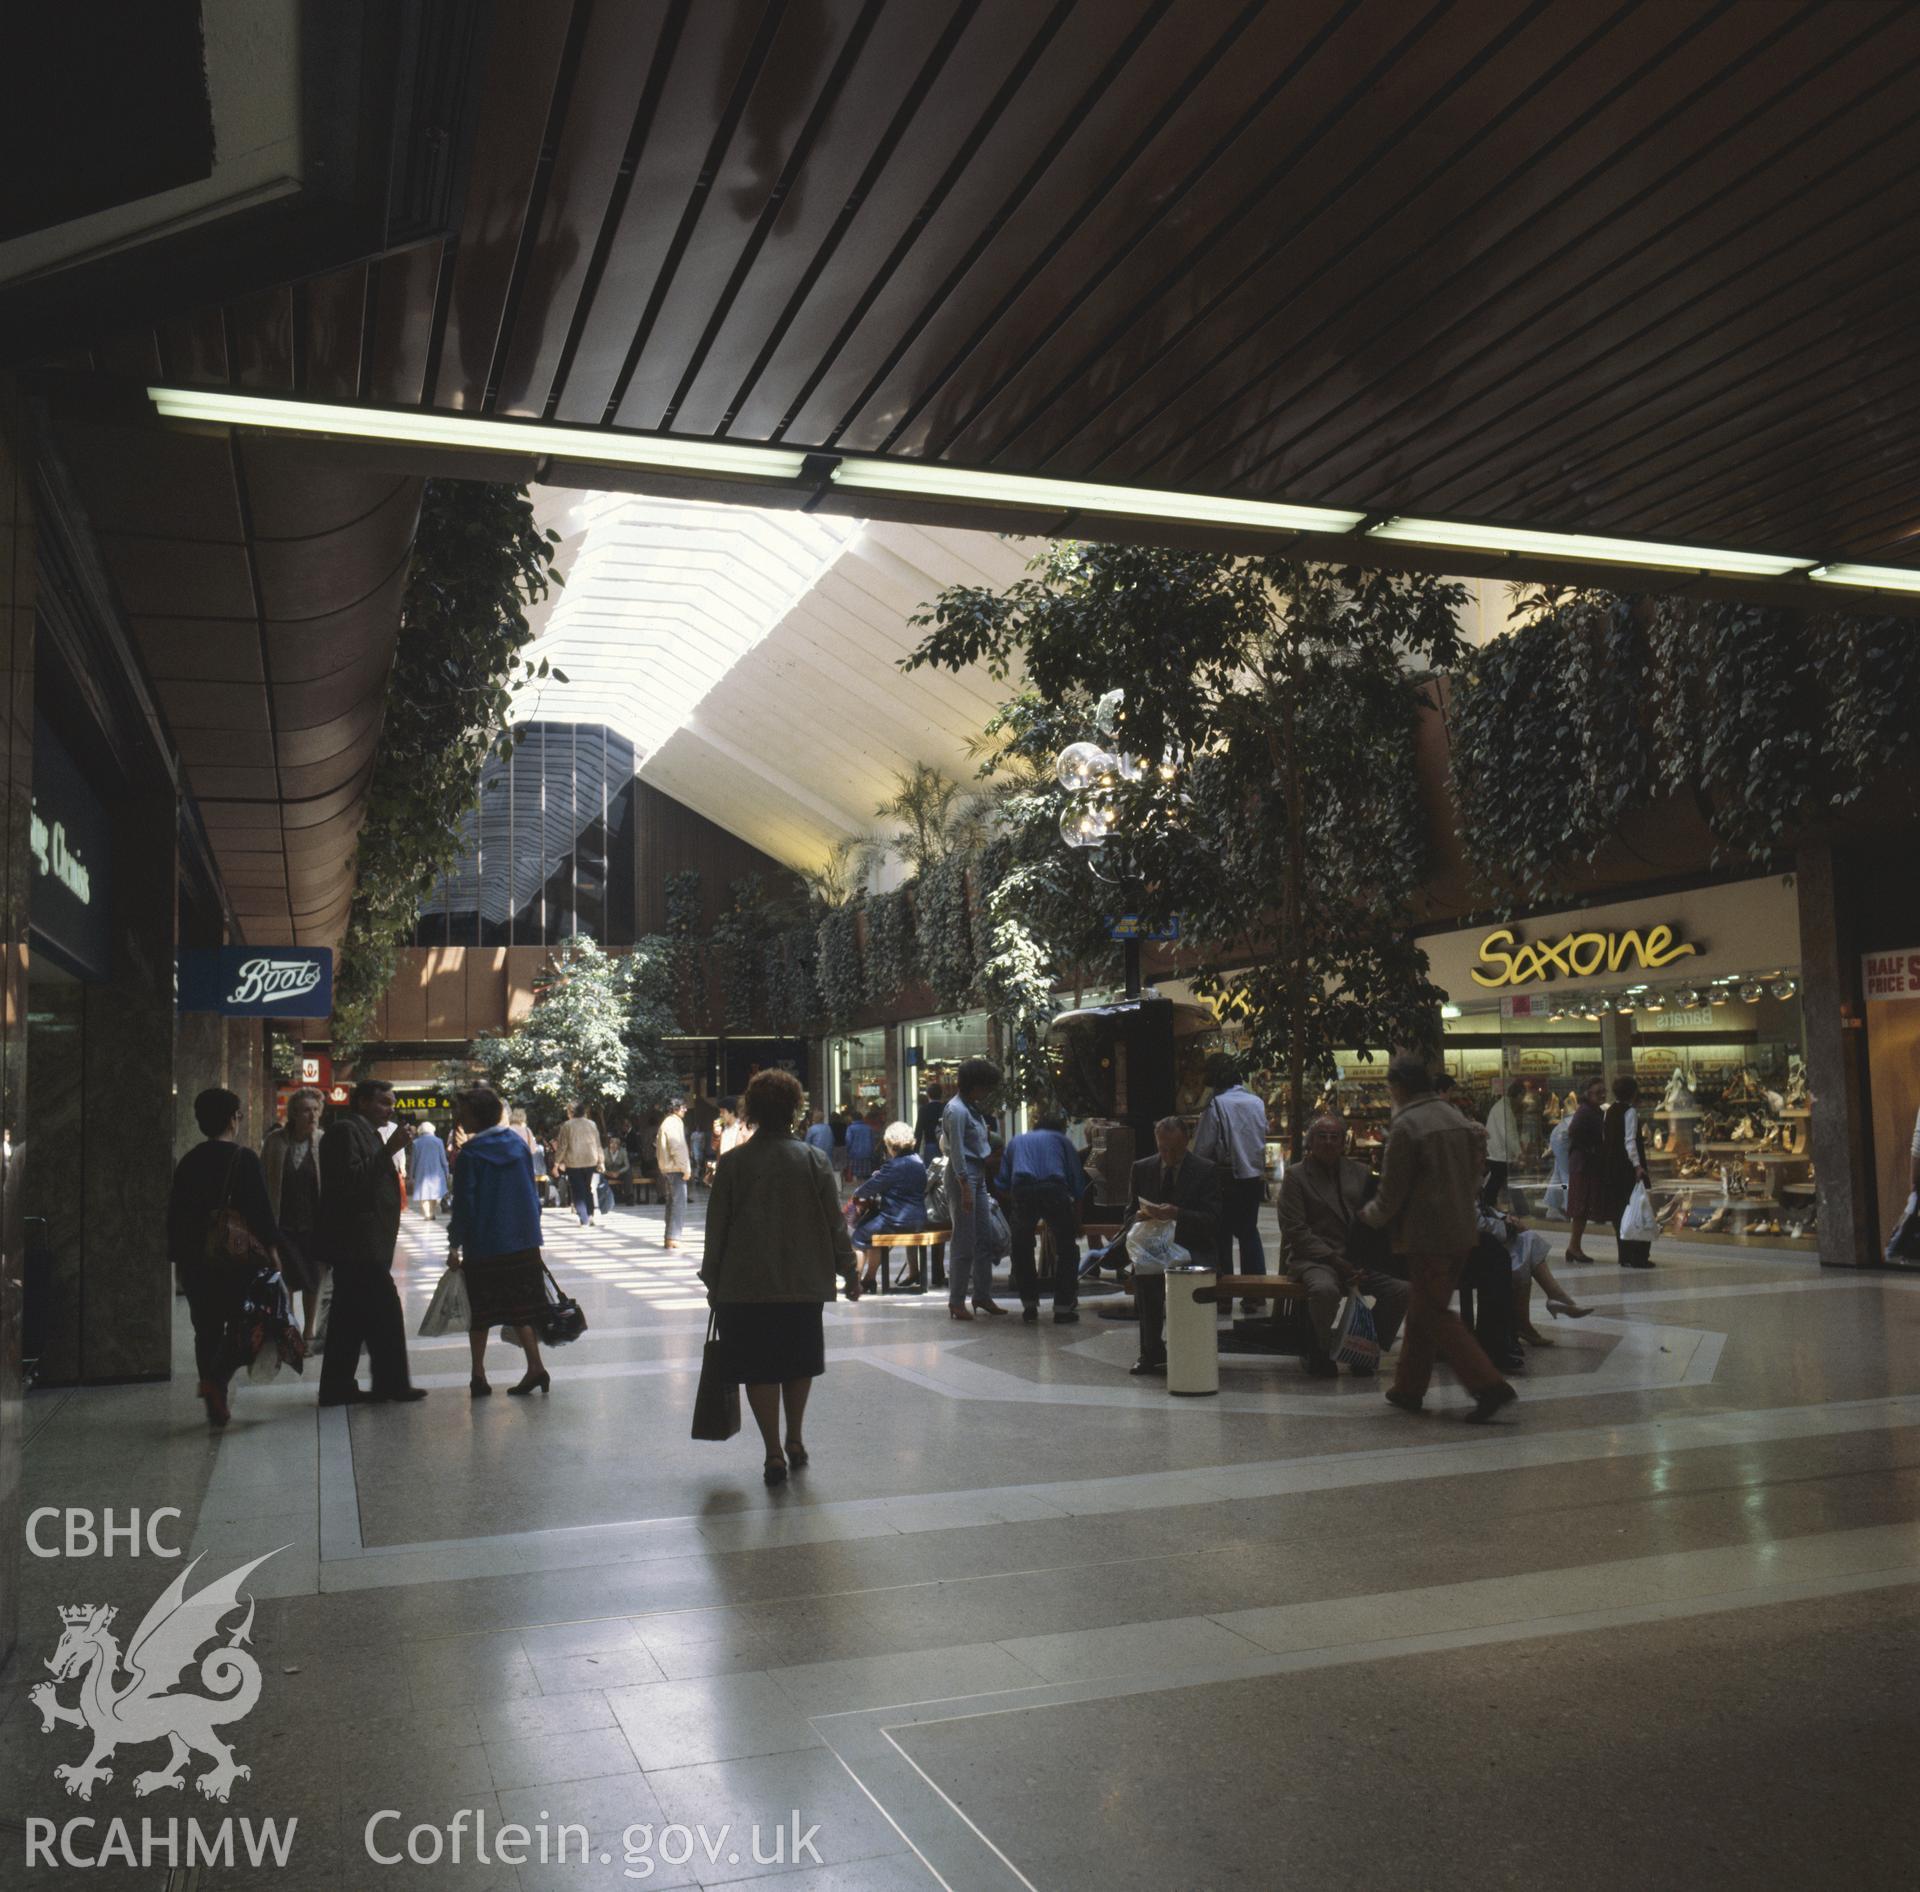 1 colour transparency showing view of St Davids Centre, Cardiff with shoppers; collated by the former Central Office of Information.